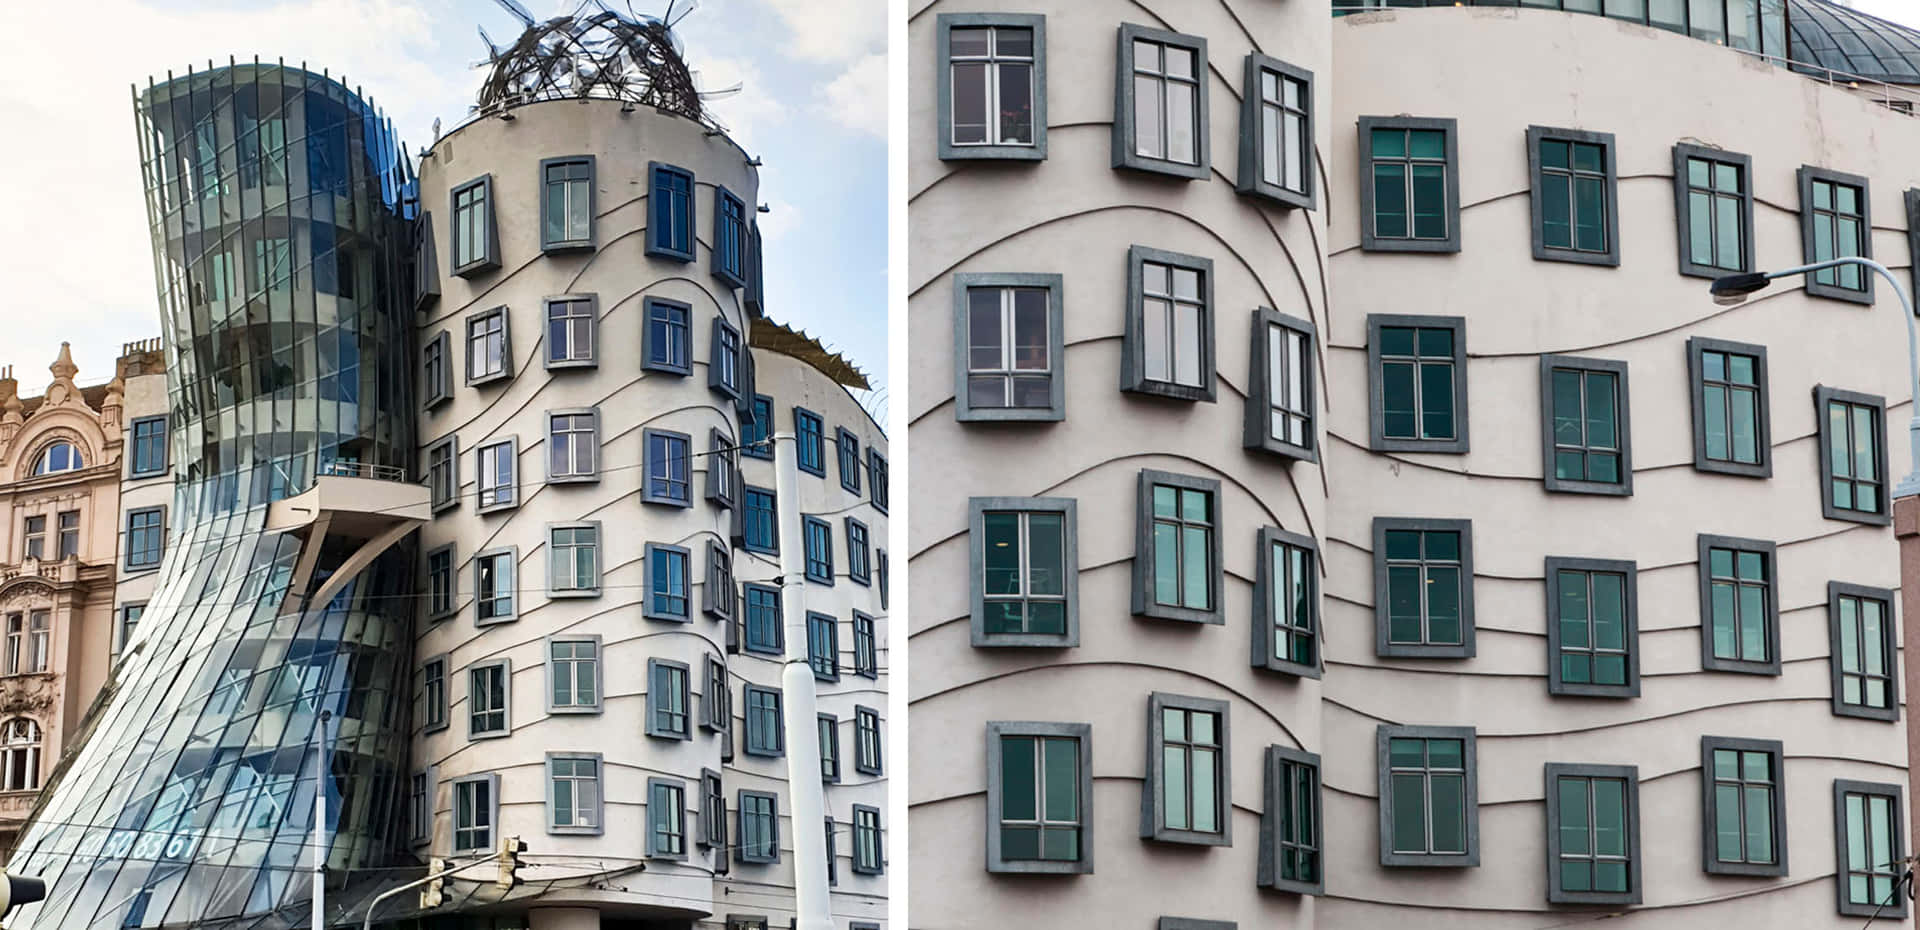 Two Photos Of The Dancing House Wallpaper